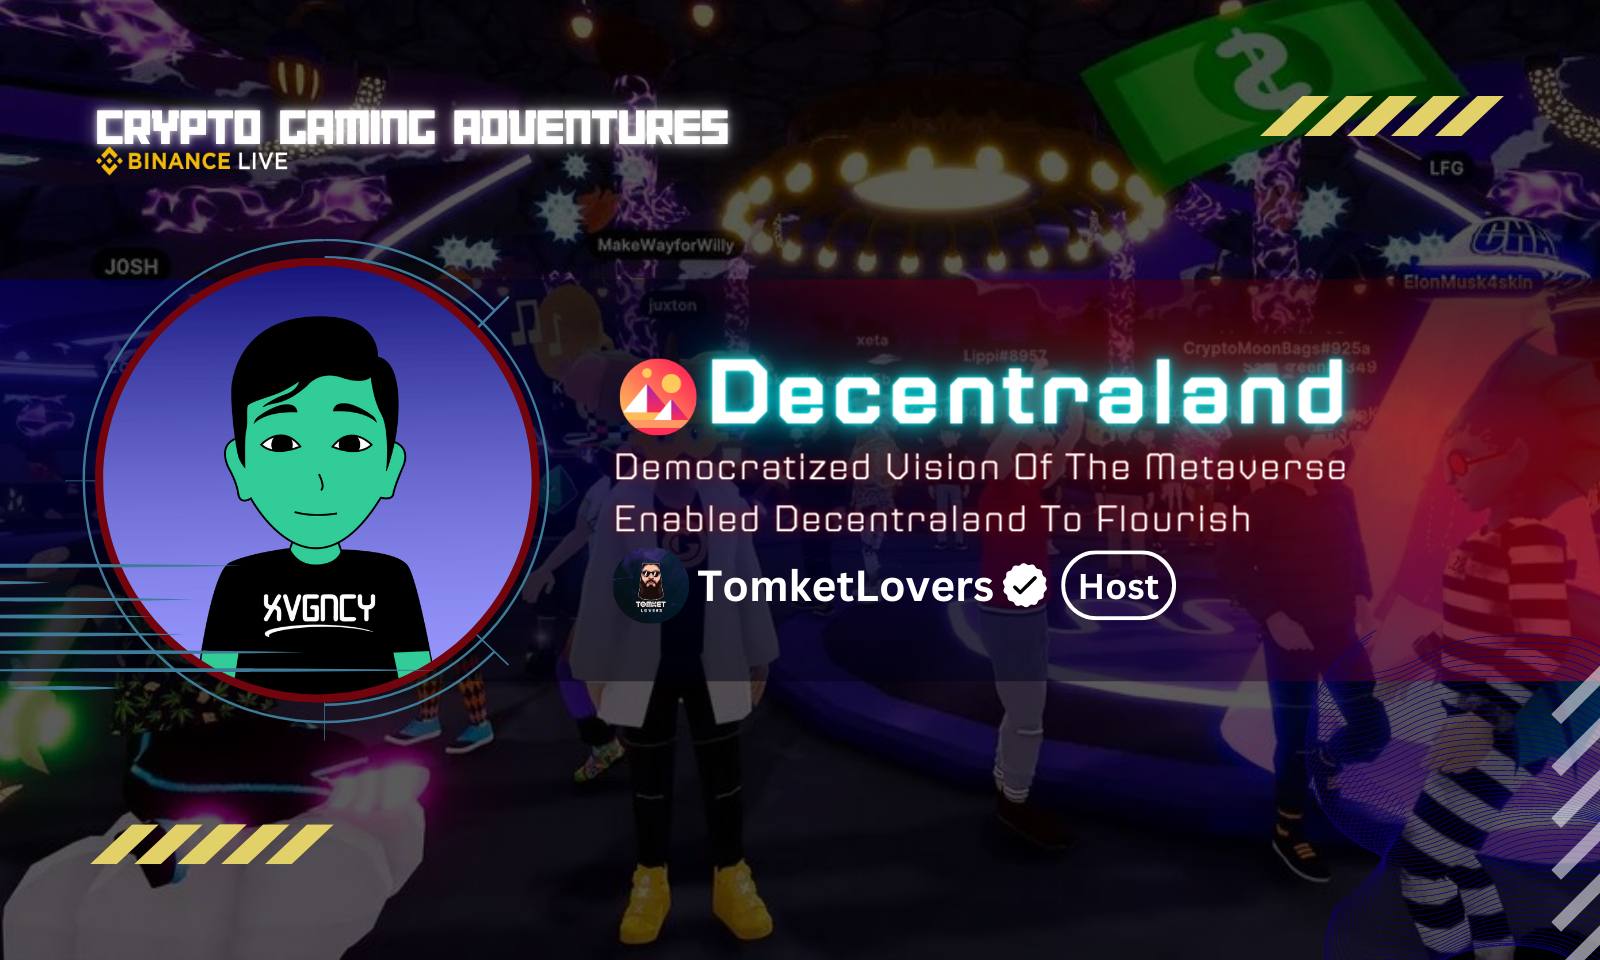 Democratized Vision Of The Metaverse Enabled Decentraland To Flourish